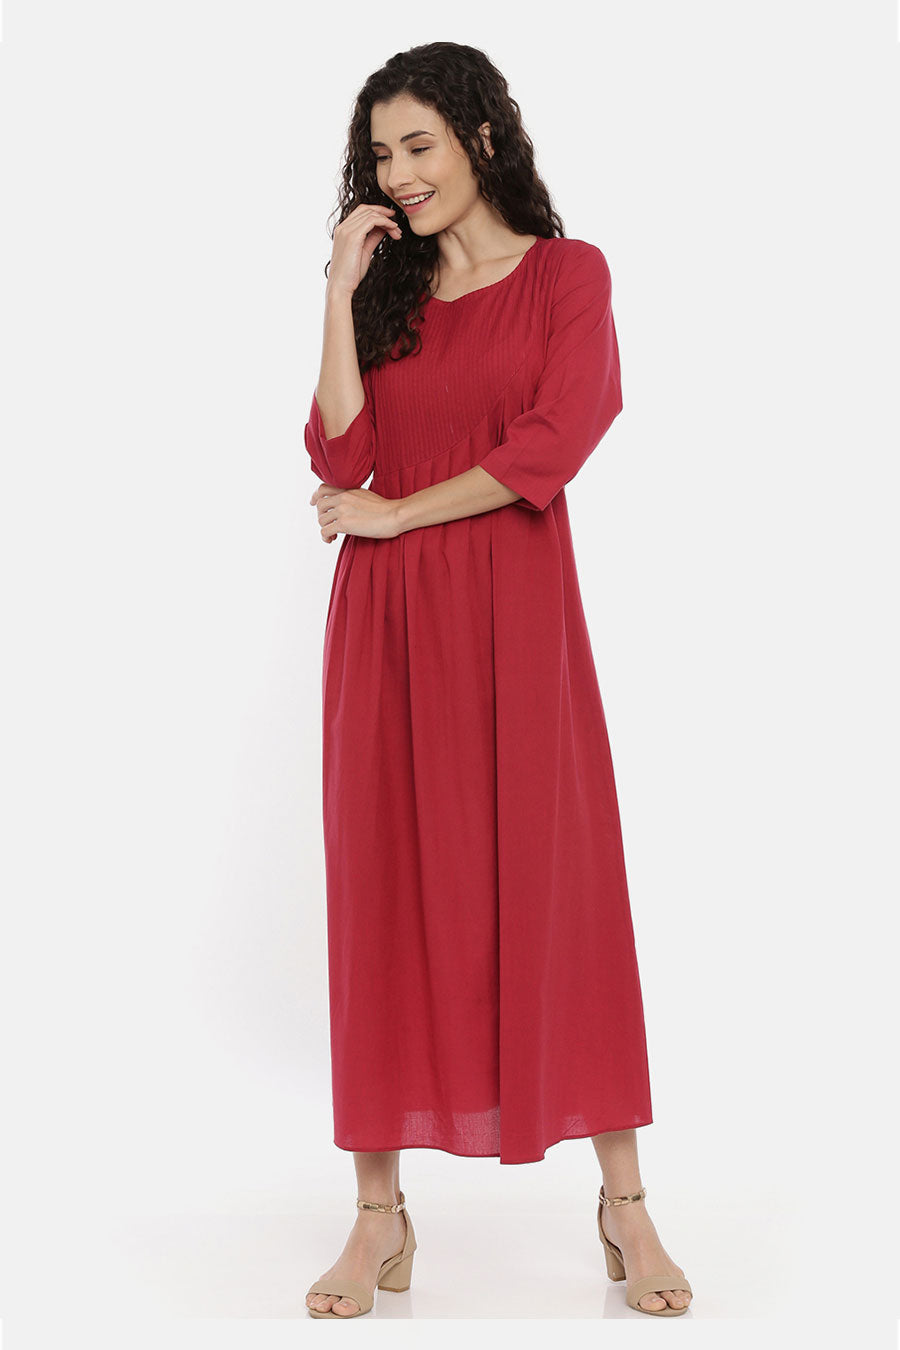 Cherry Red Cotton Pleated Dress